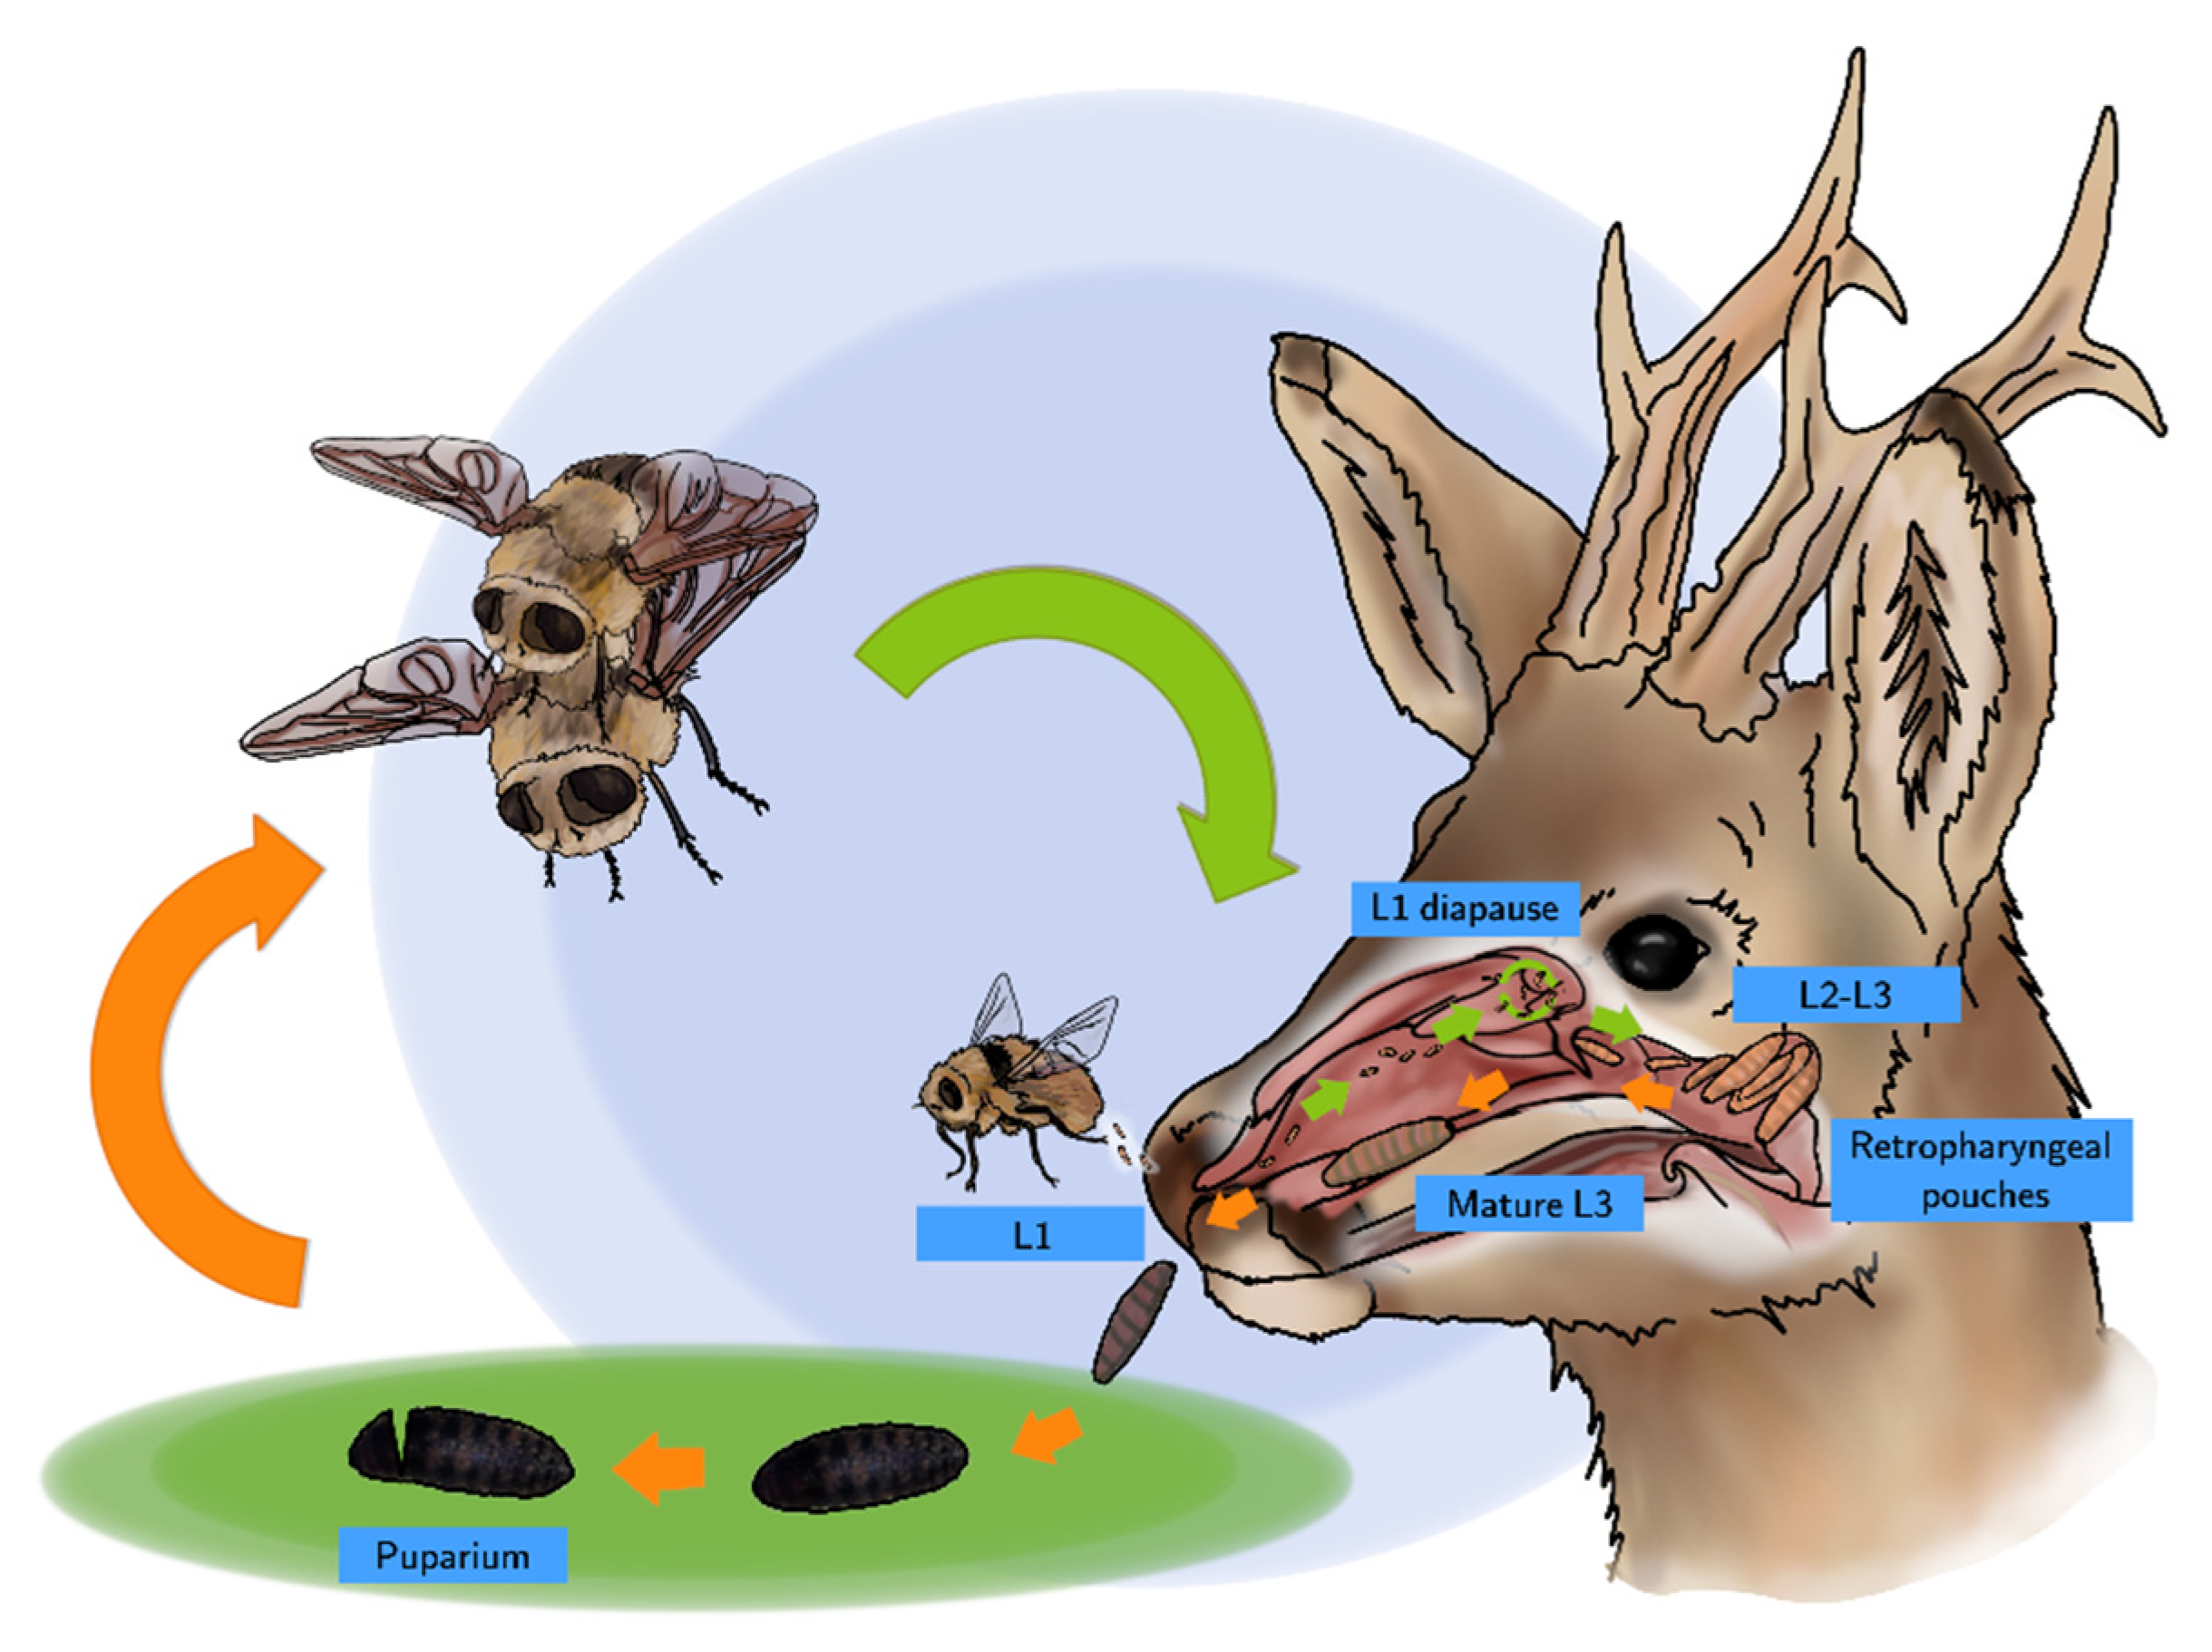 Life Cycle - Oestrus ovis - Nasal Bot Fly